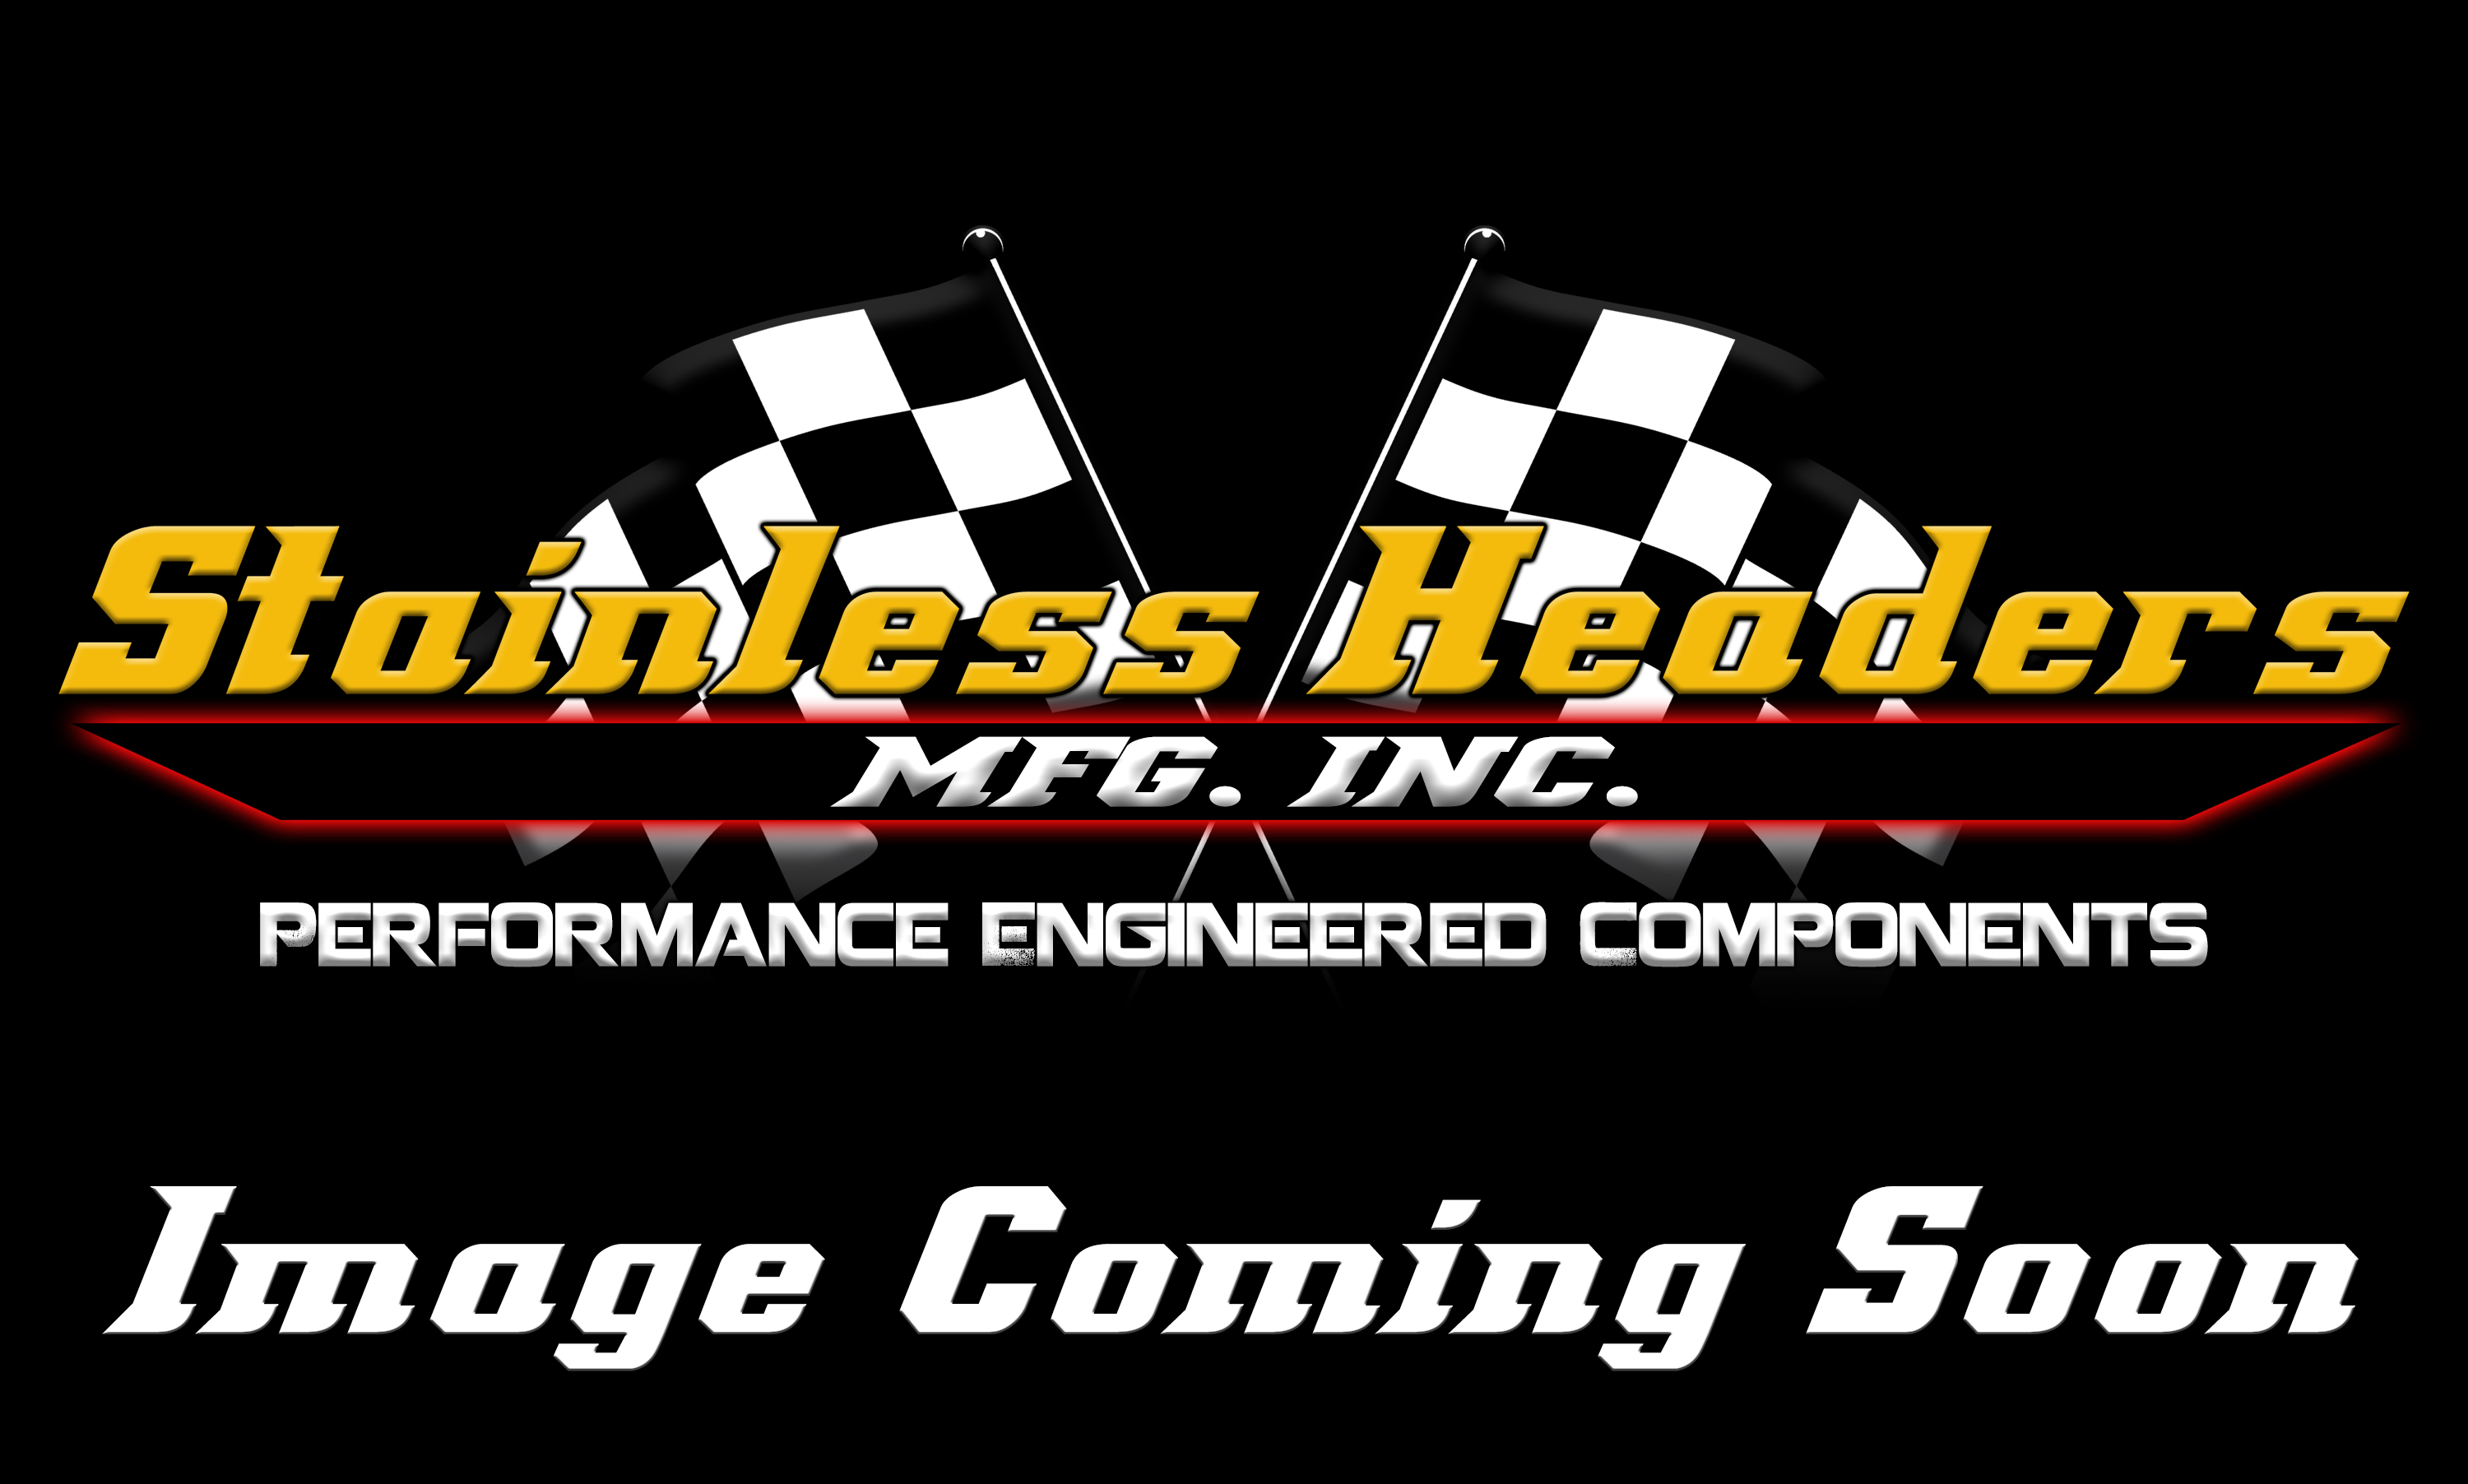 Stainless Headers - 5" Bore Space Big Block Chevy Turbo Manifold Build Kit - Image 4